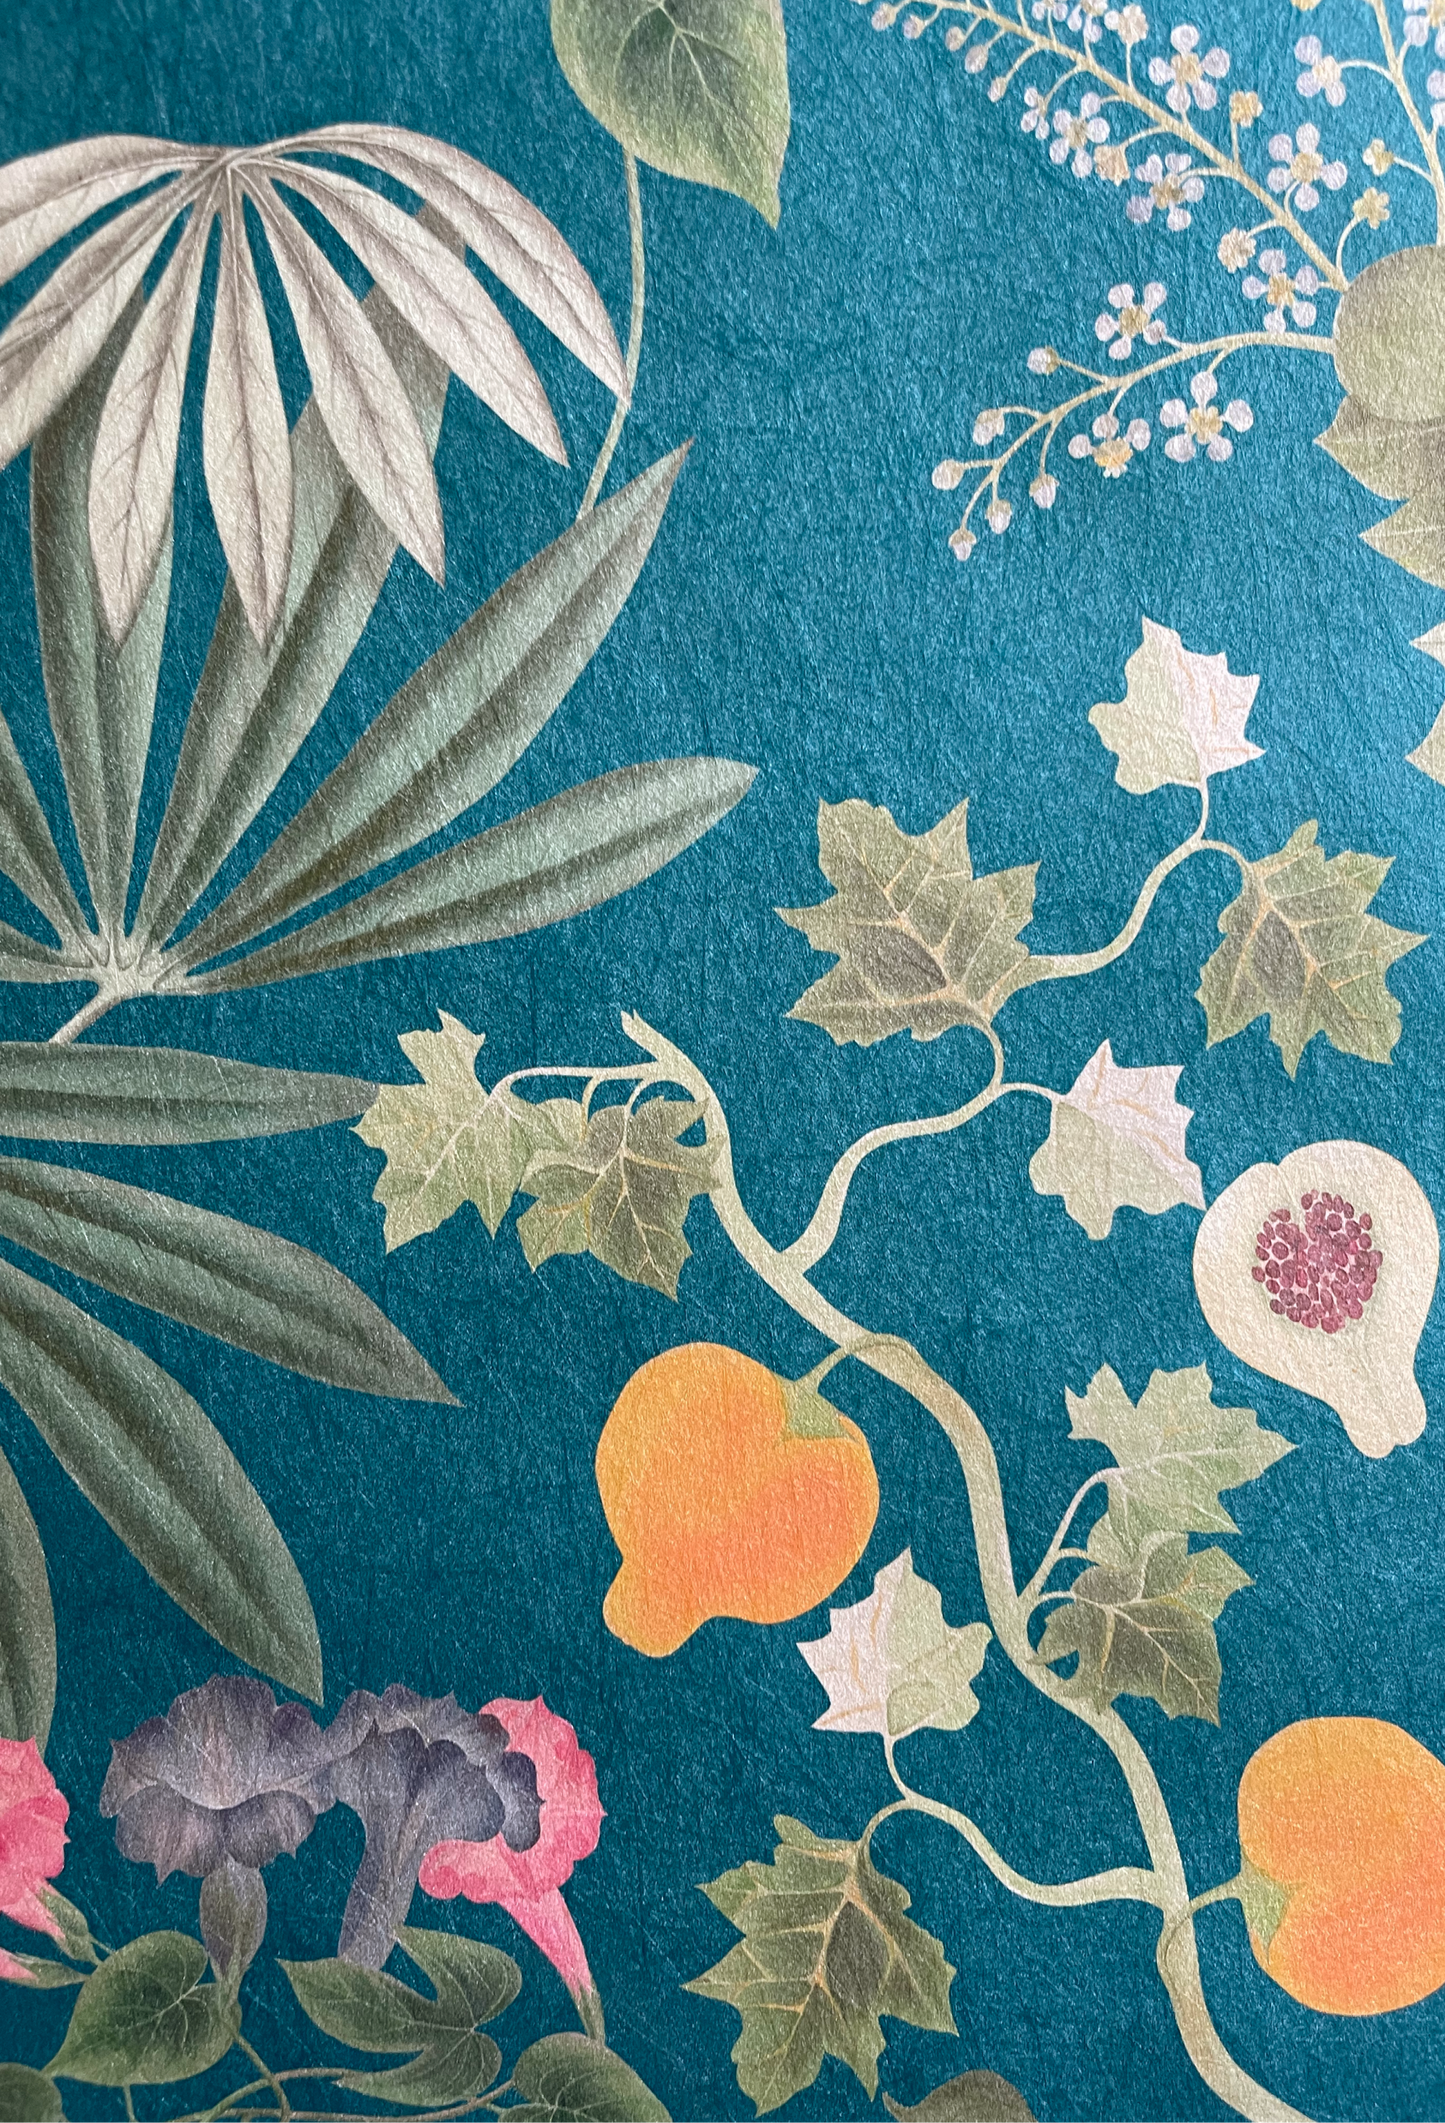 Fruit surrounded by flowers and leaves of the Eden Wallpaper in Cornflower Blue by Deus ex Gardenia.